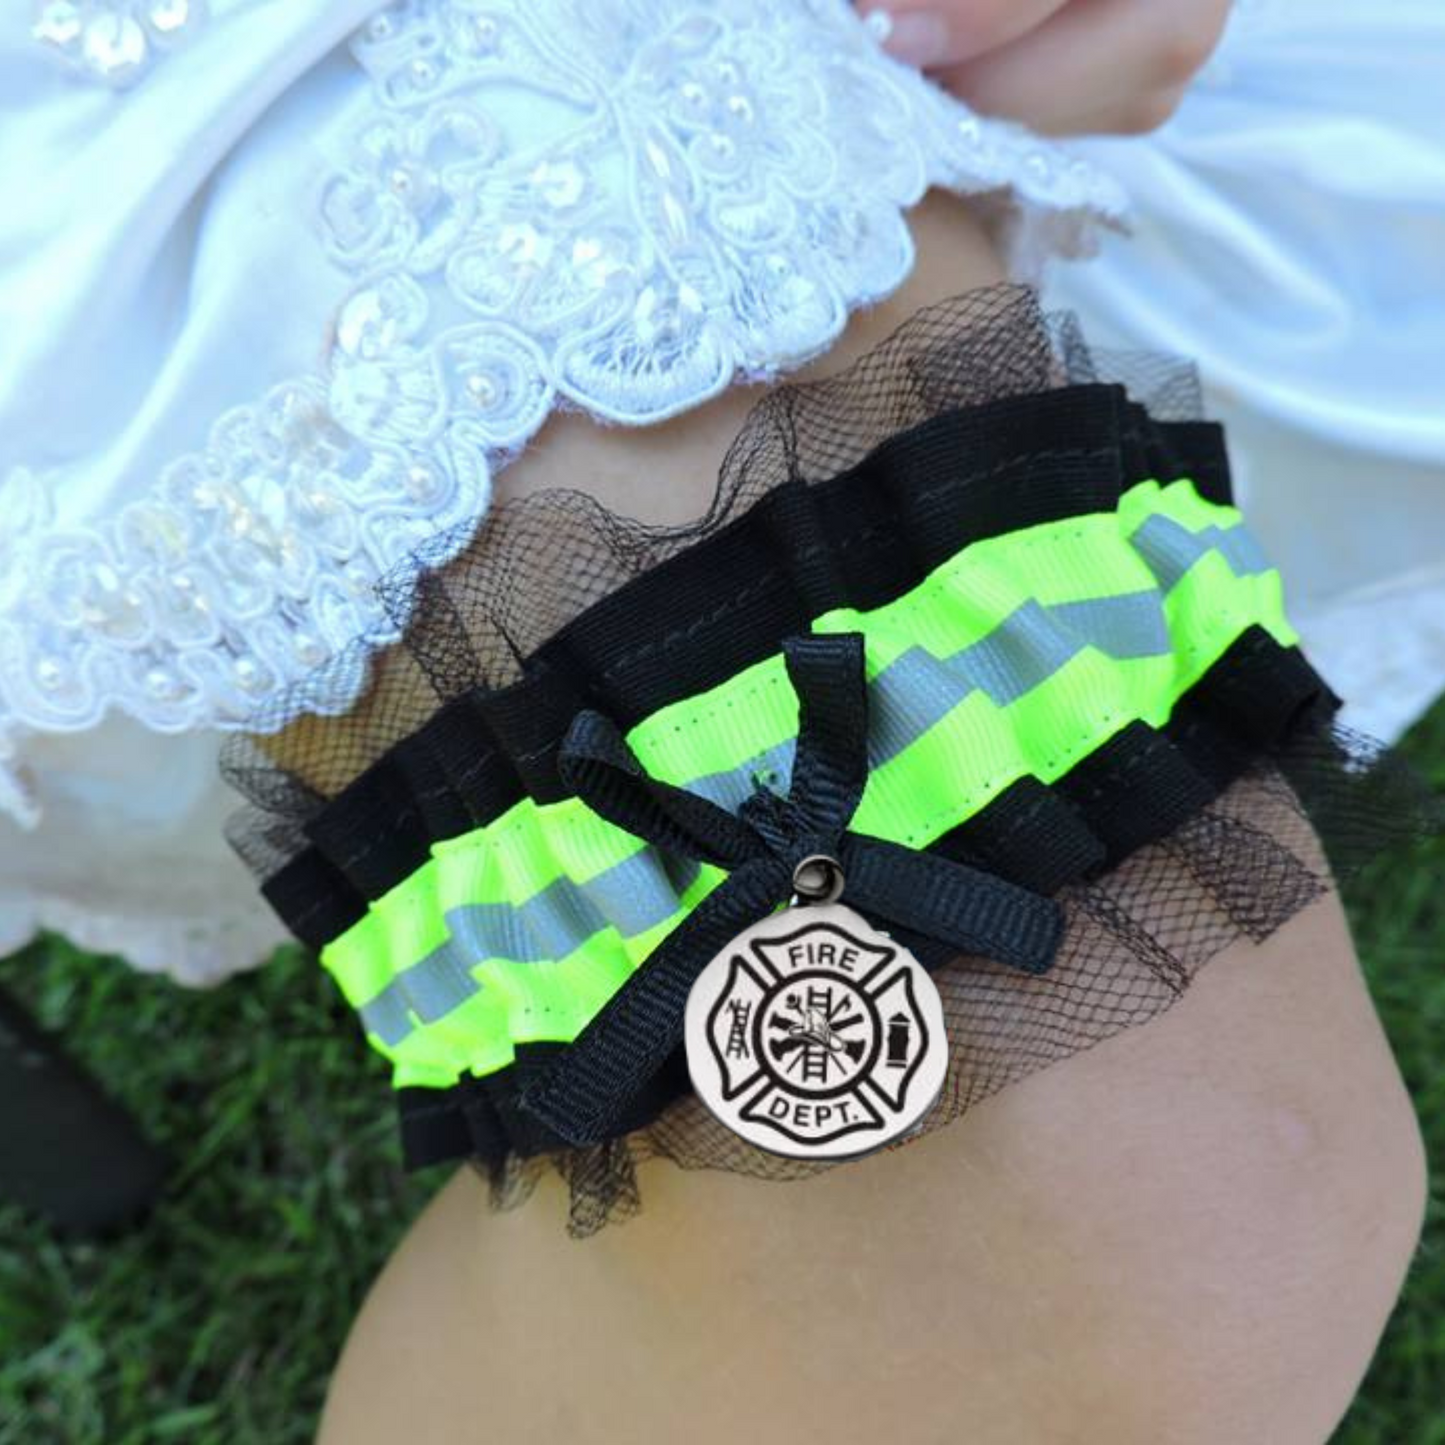 Firefighter wedding garter set, one with black tulle, toss garter without tulle black fabric and neon yellow reflective tape